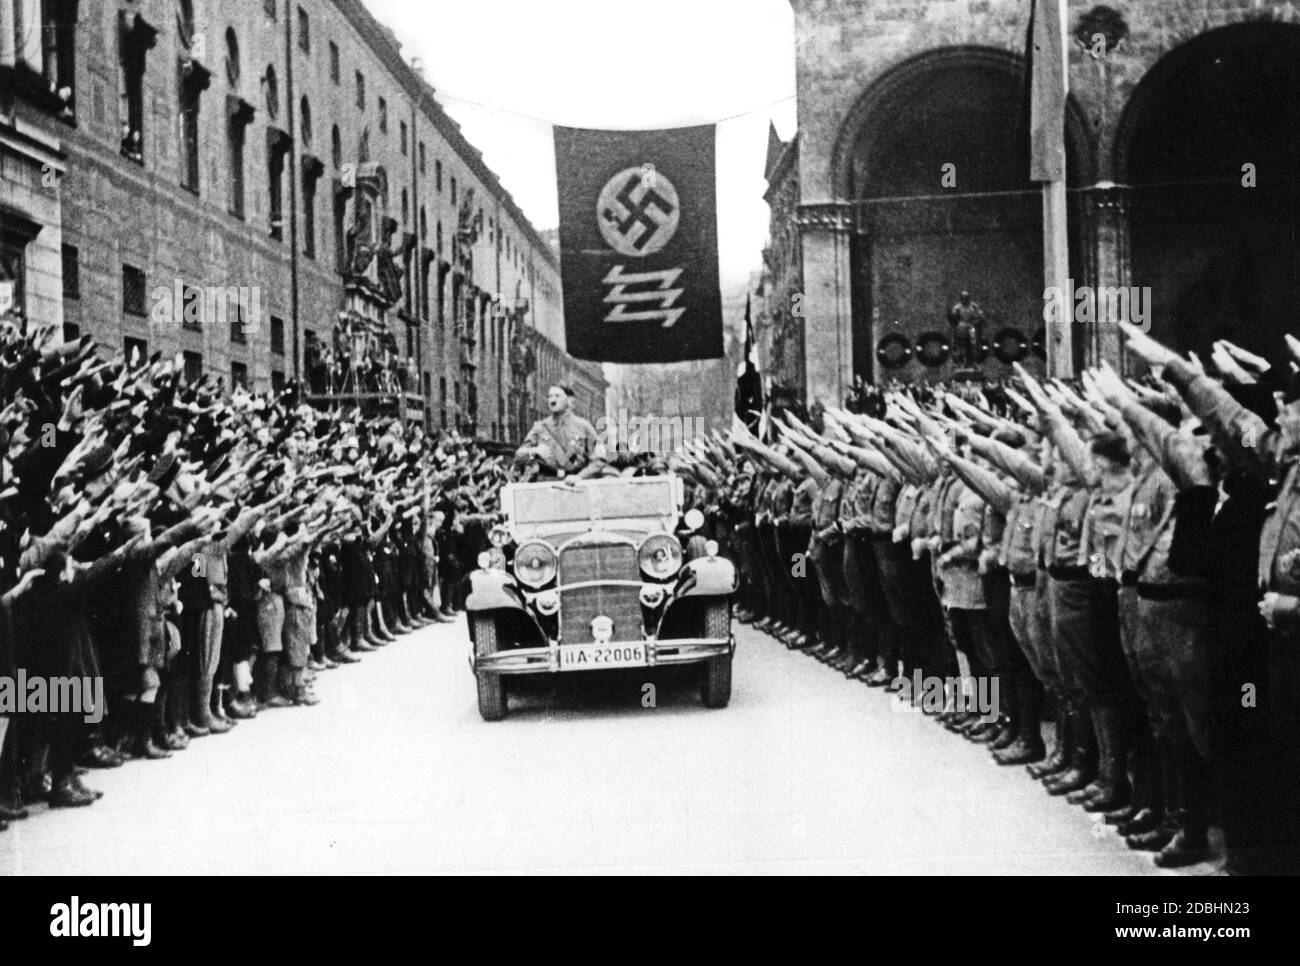 "Adolf Hitler and the NSDAP celebrate the achievement of their goals on November 9, 1933, 10 years after the failed coup. Hitler had become Reich Chancellor that year. At the place under the flag with swastika and Wolfsangel, which can be seen in the background, a commemorative plaque was placed in honor of the martyrs of November 9, 1923, which could only be passed by saluting with the Nazi salute. From then on, the 9th of November became a National Socialist holiday, as part of which the traditional march took place from the Buergerbraeukeller at the Wiener Platz across the Ludwigsbruecke Stock Photo